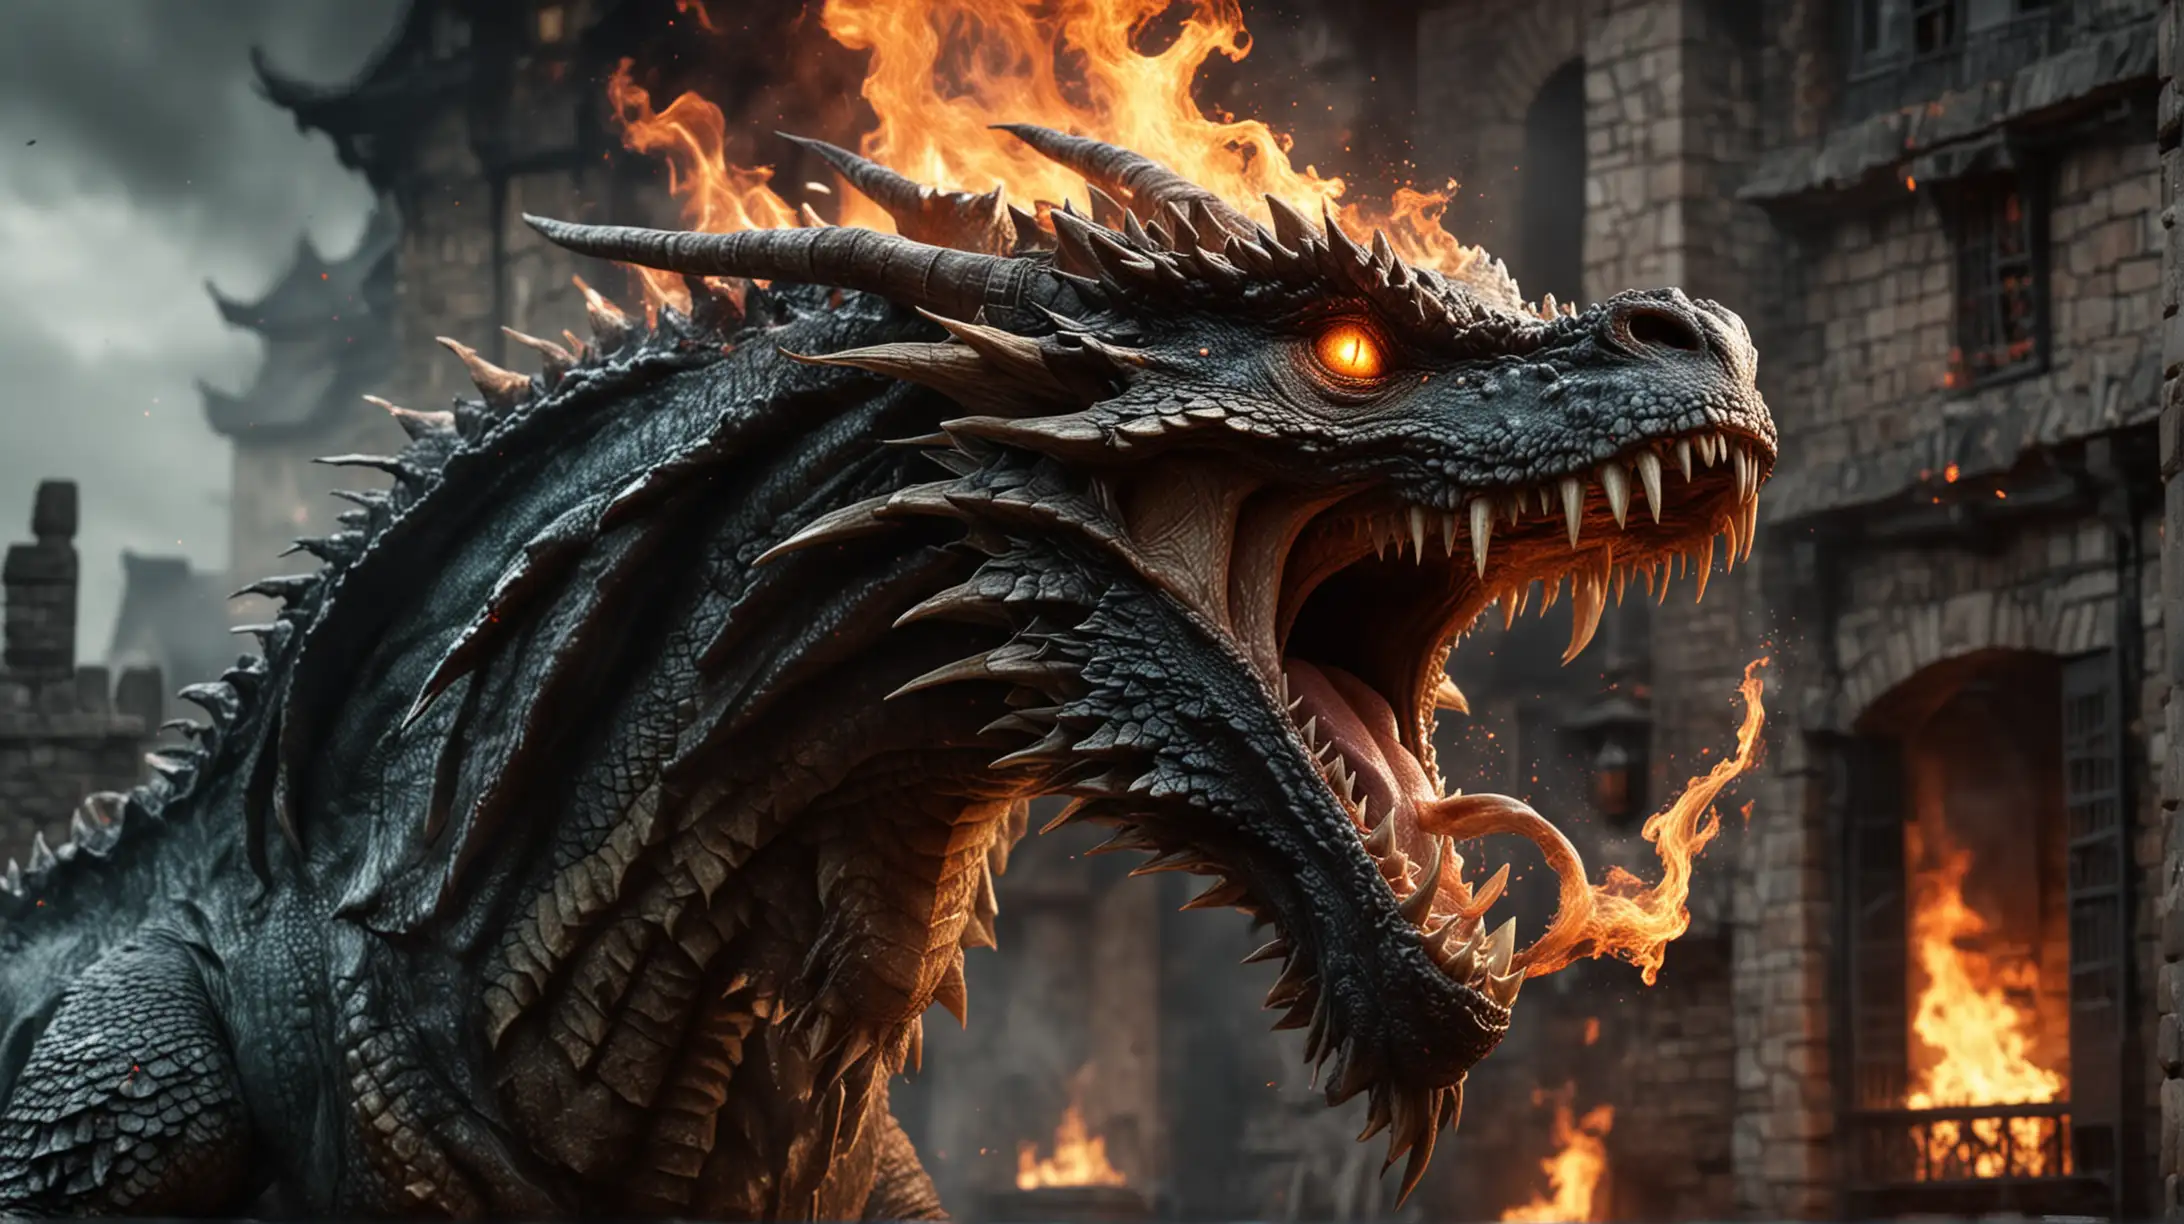 Scary dragon with huge teeth spitting fire . House of dragon style 